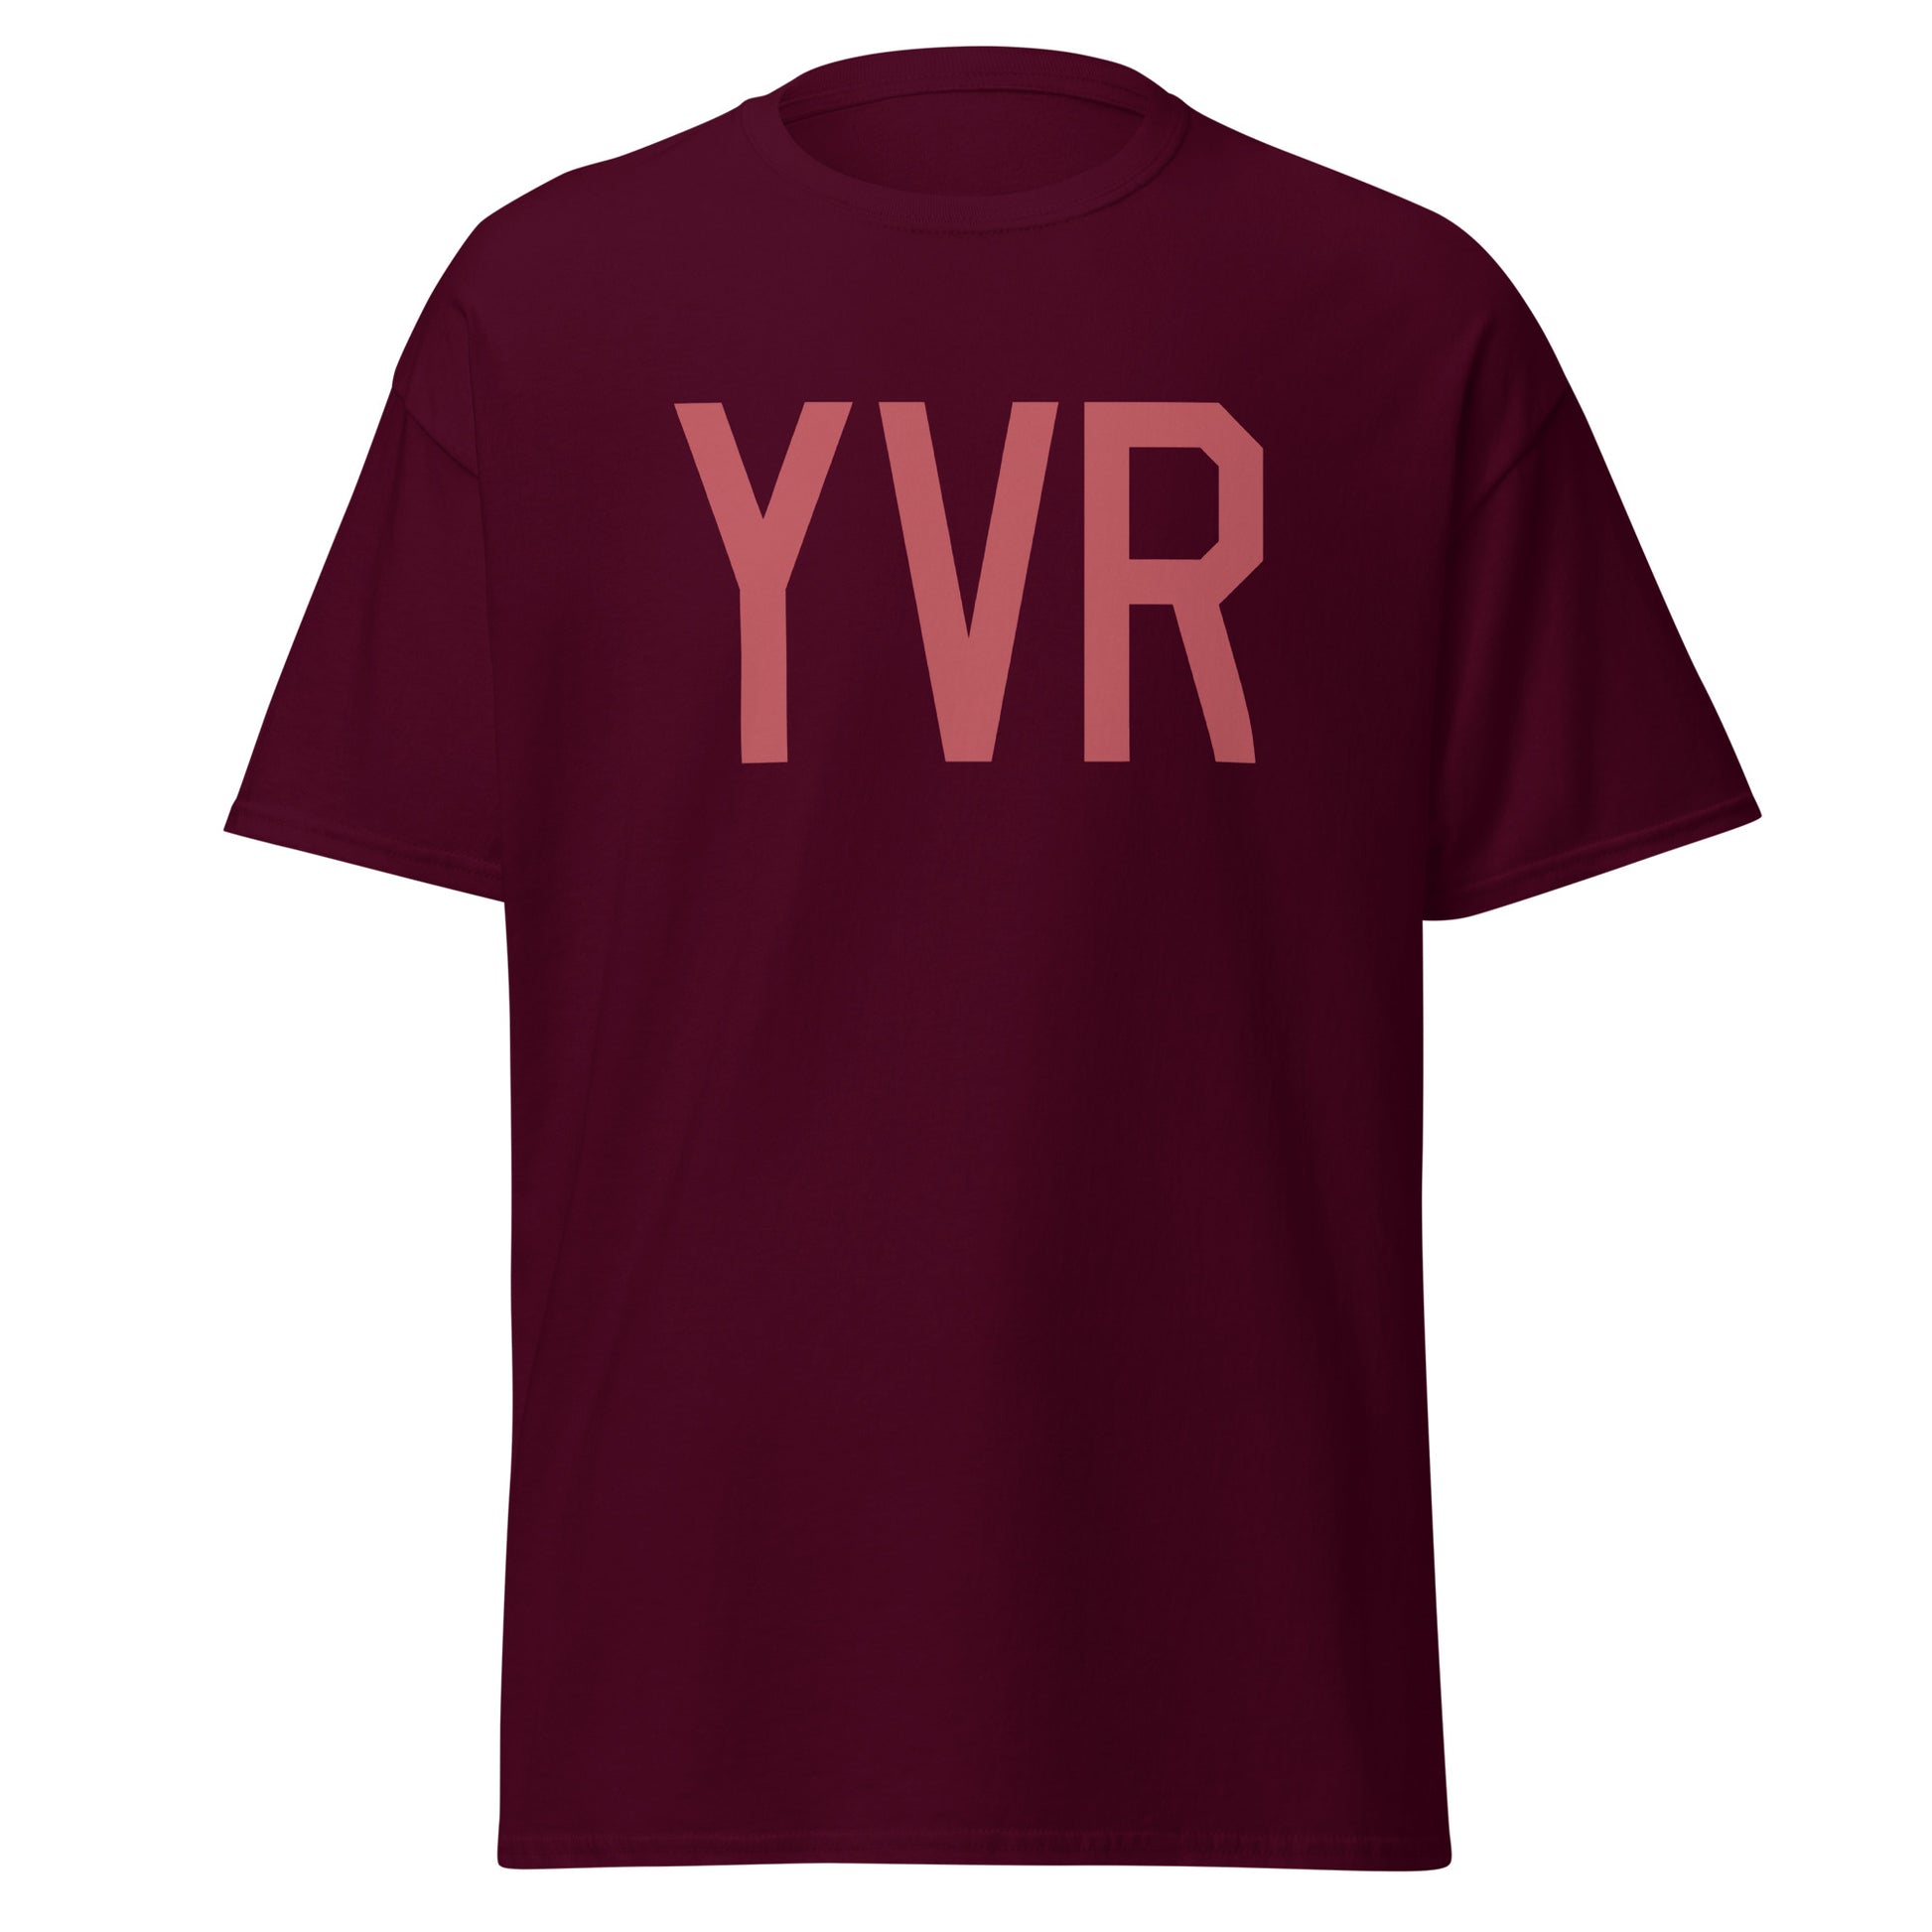 Aviation Enthusiast Men's Tee - Deep Pink Graphic • YVR Vancouver • YHM Designs - Image 05